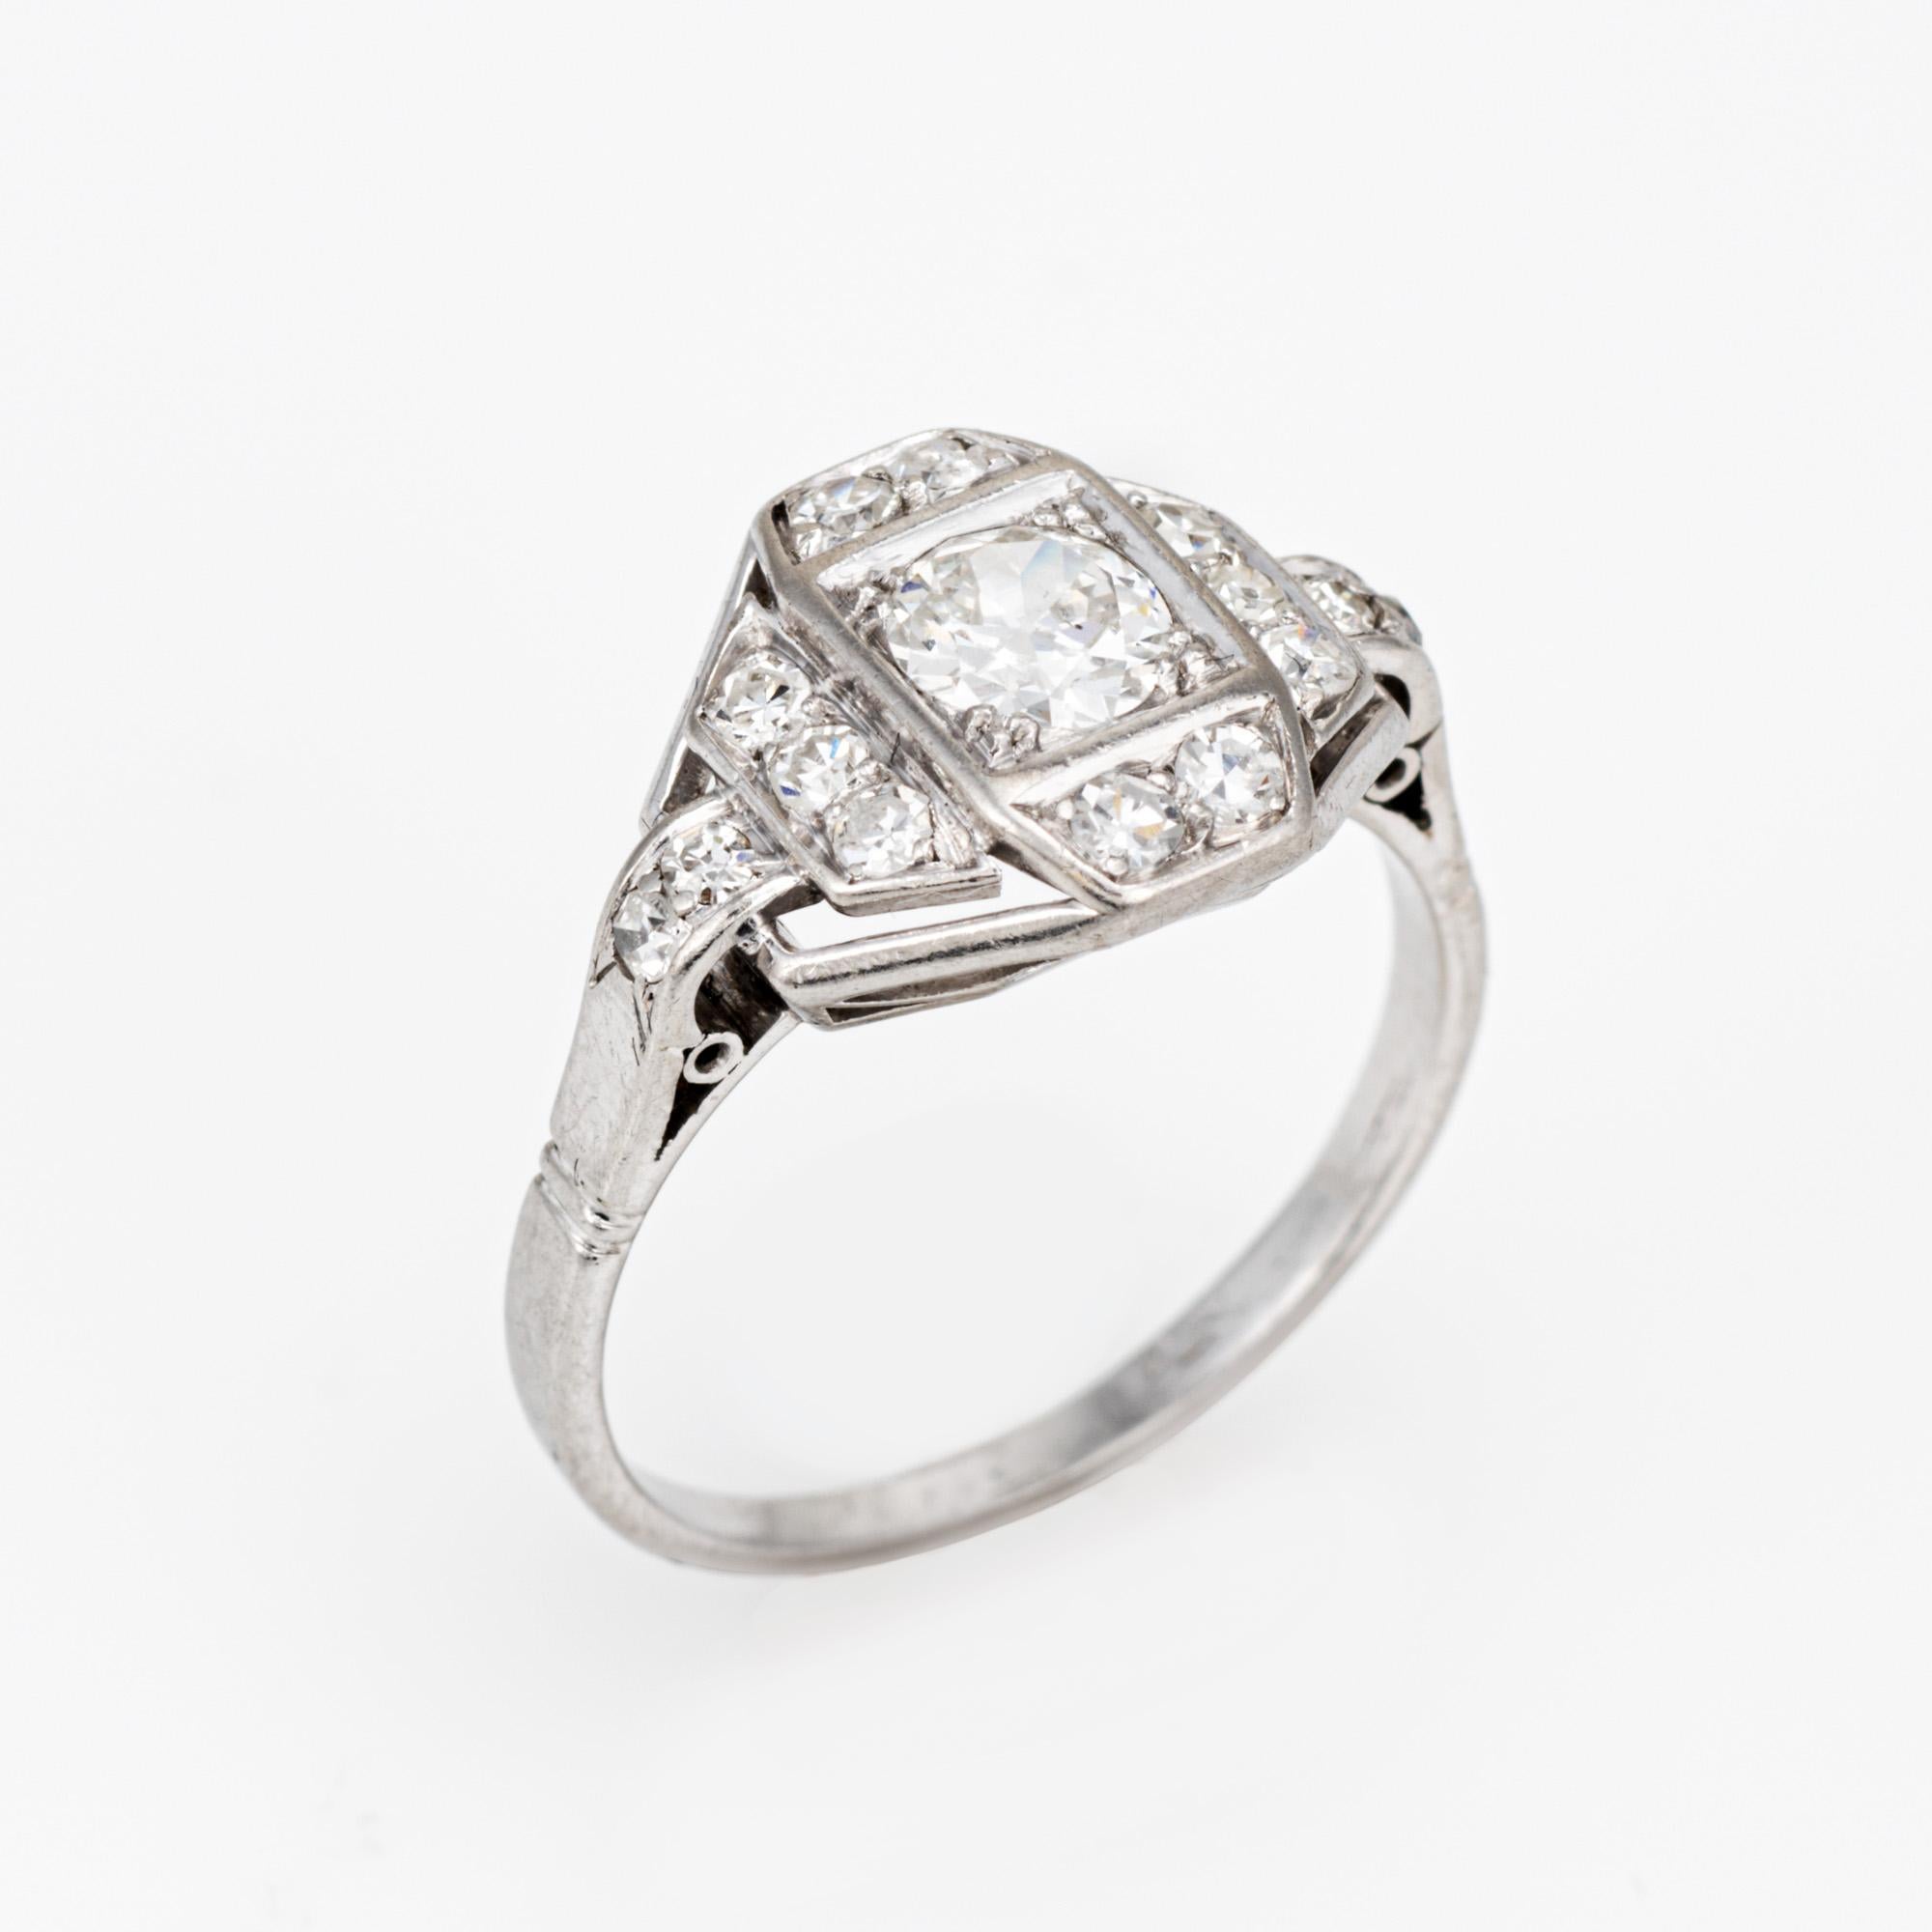 Finely detailed vintage French Art Deco diamond ring (circa 1920s to 1930s) crafted in 900 platinum. 

Center set old European cut diamond is estimated at 0.50 carats, accented with an estimated 0.14 carats of single cut diamonds. The total diamond